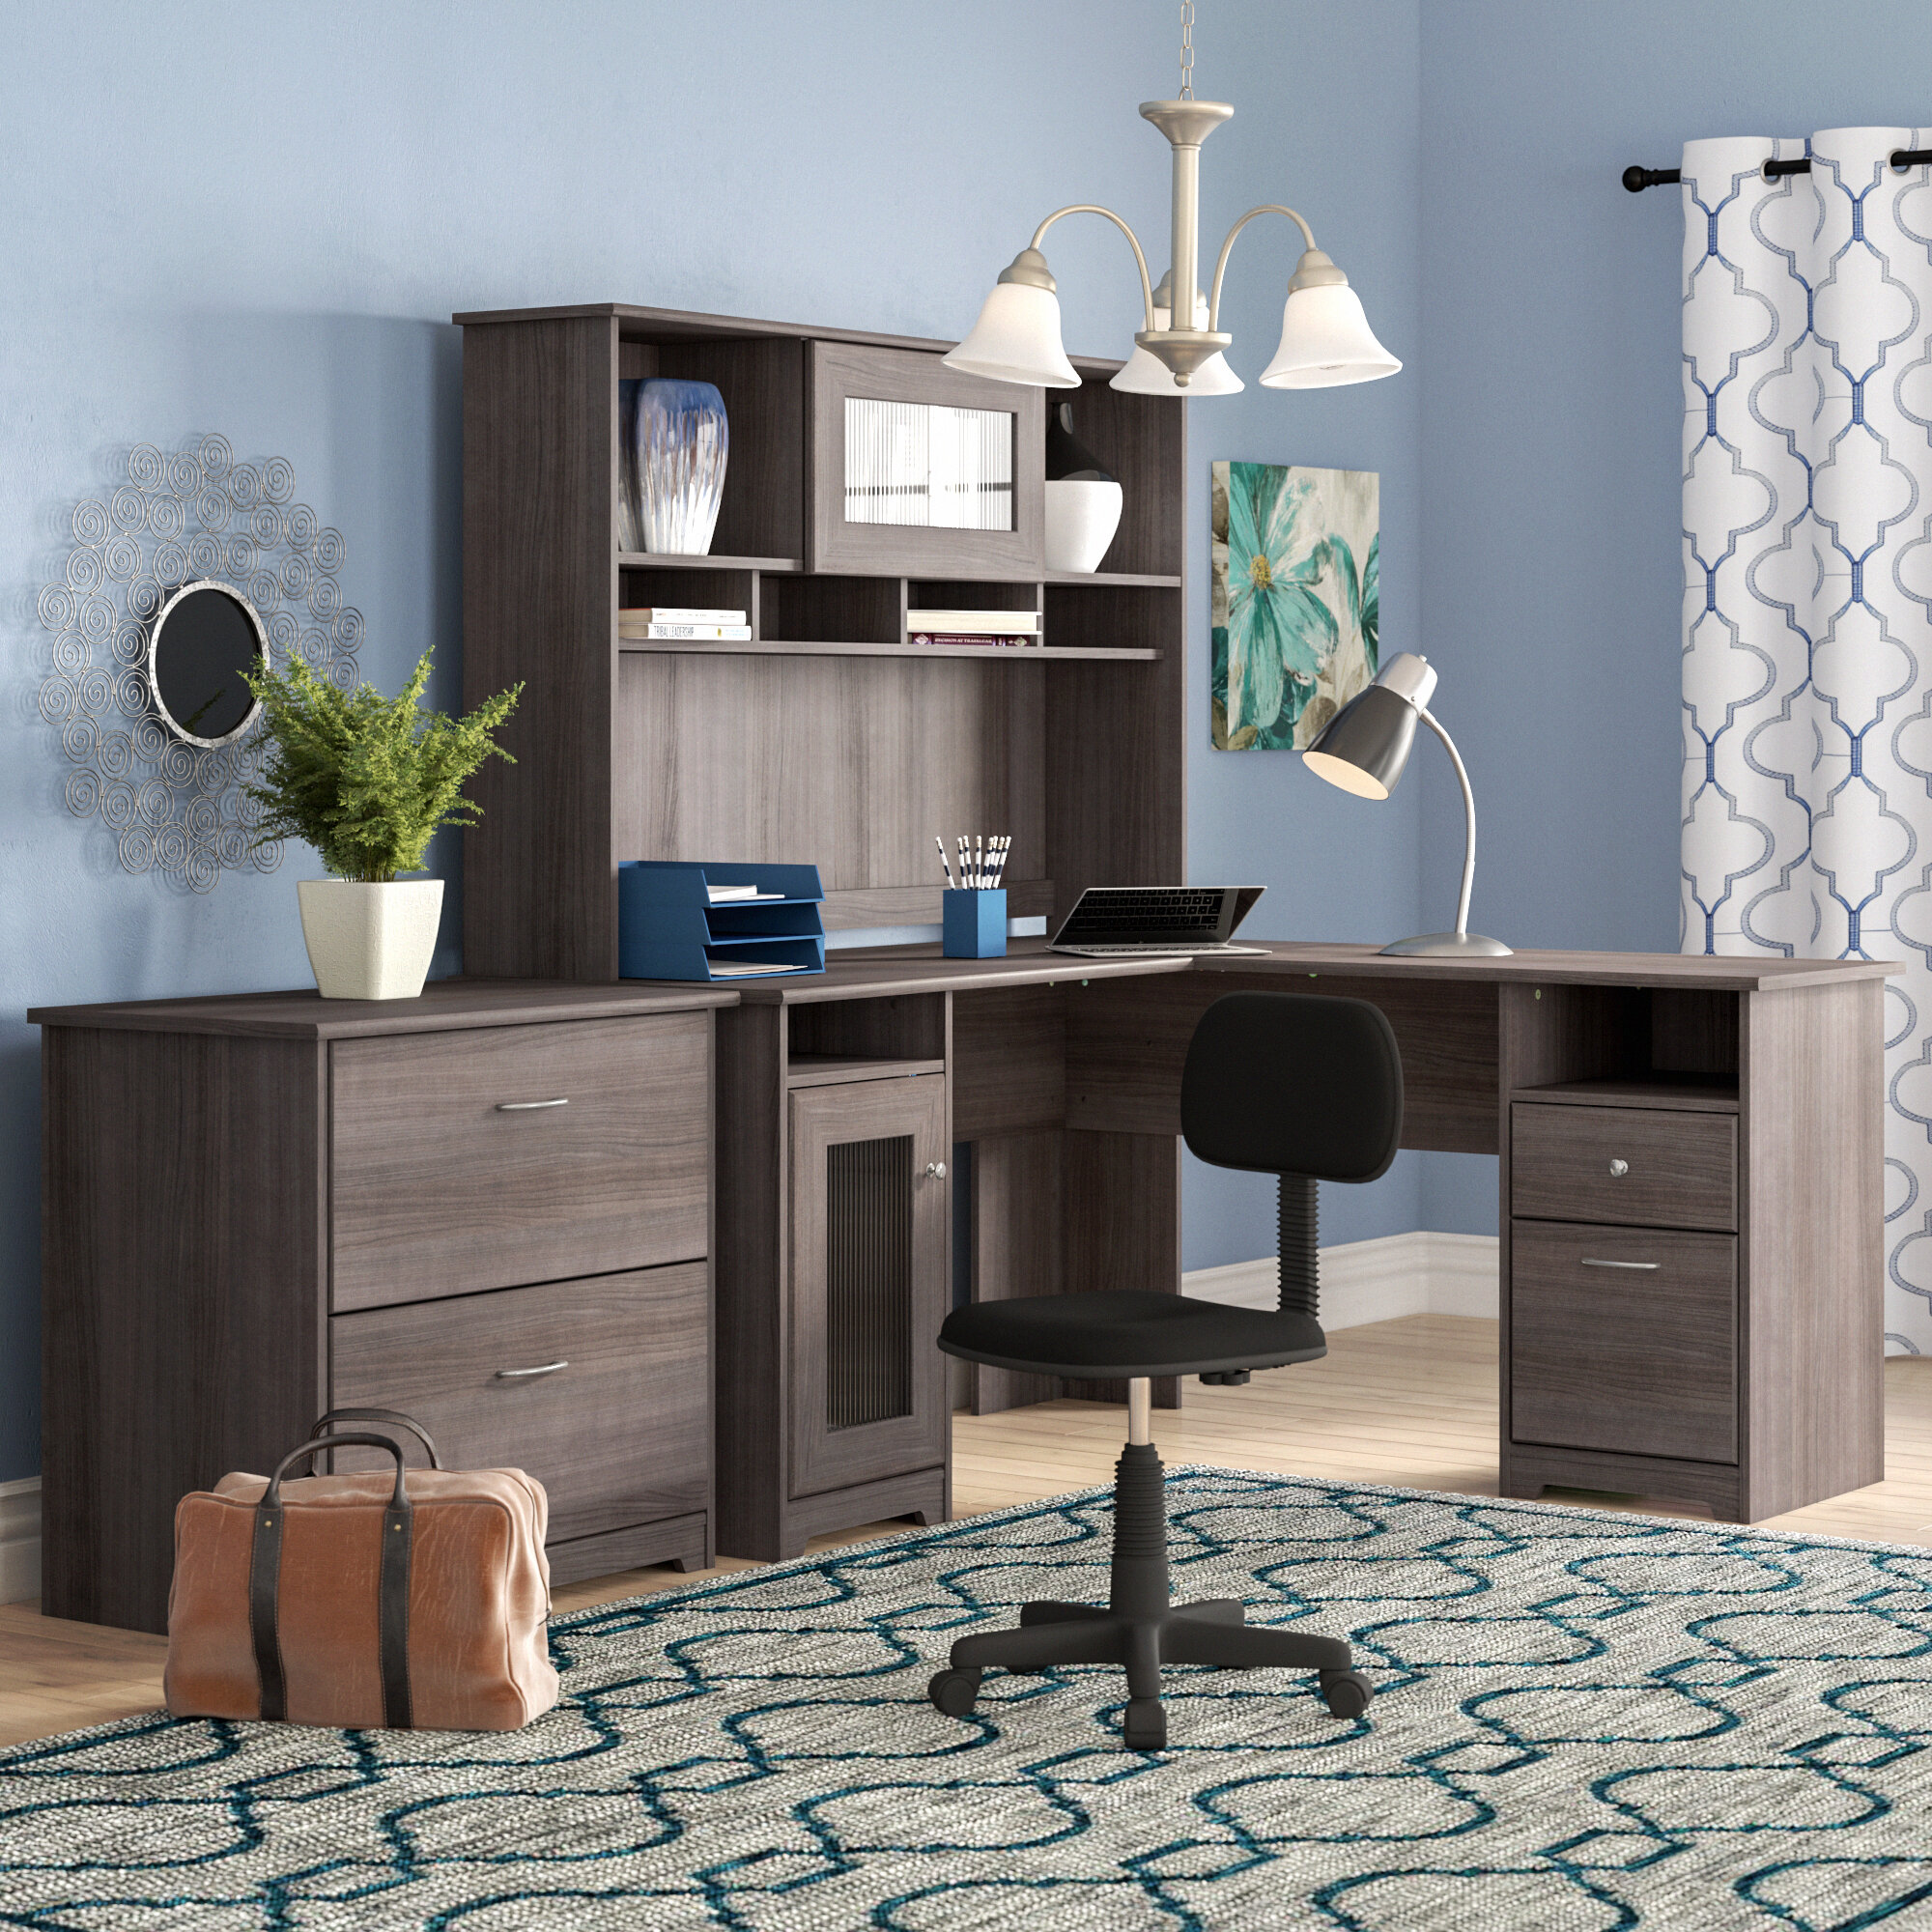 Featured image of post Grey Office Furniture Sets : Office furniture can be overlooked but why not create a designated area of your home where you can store special items, organize files and get some serious creating a home office that inspires you and keeps you organized is key to your success.